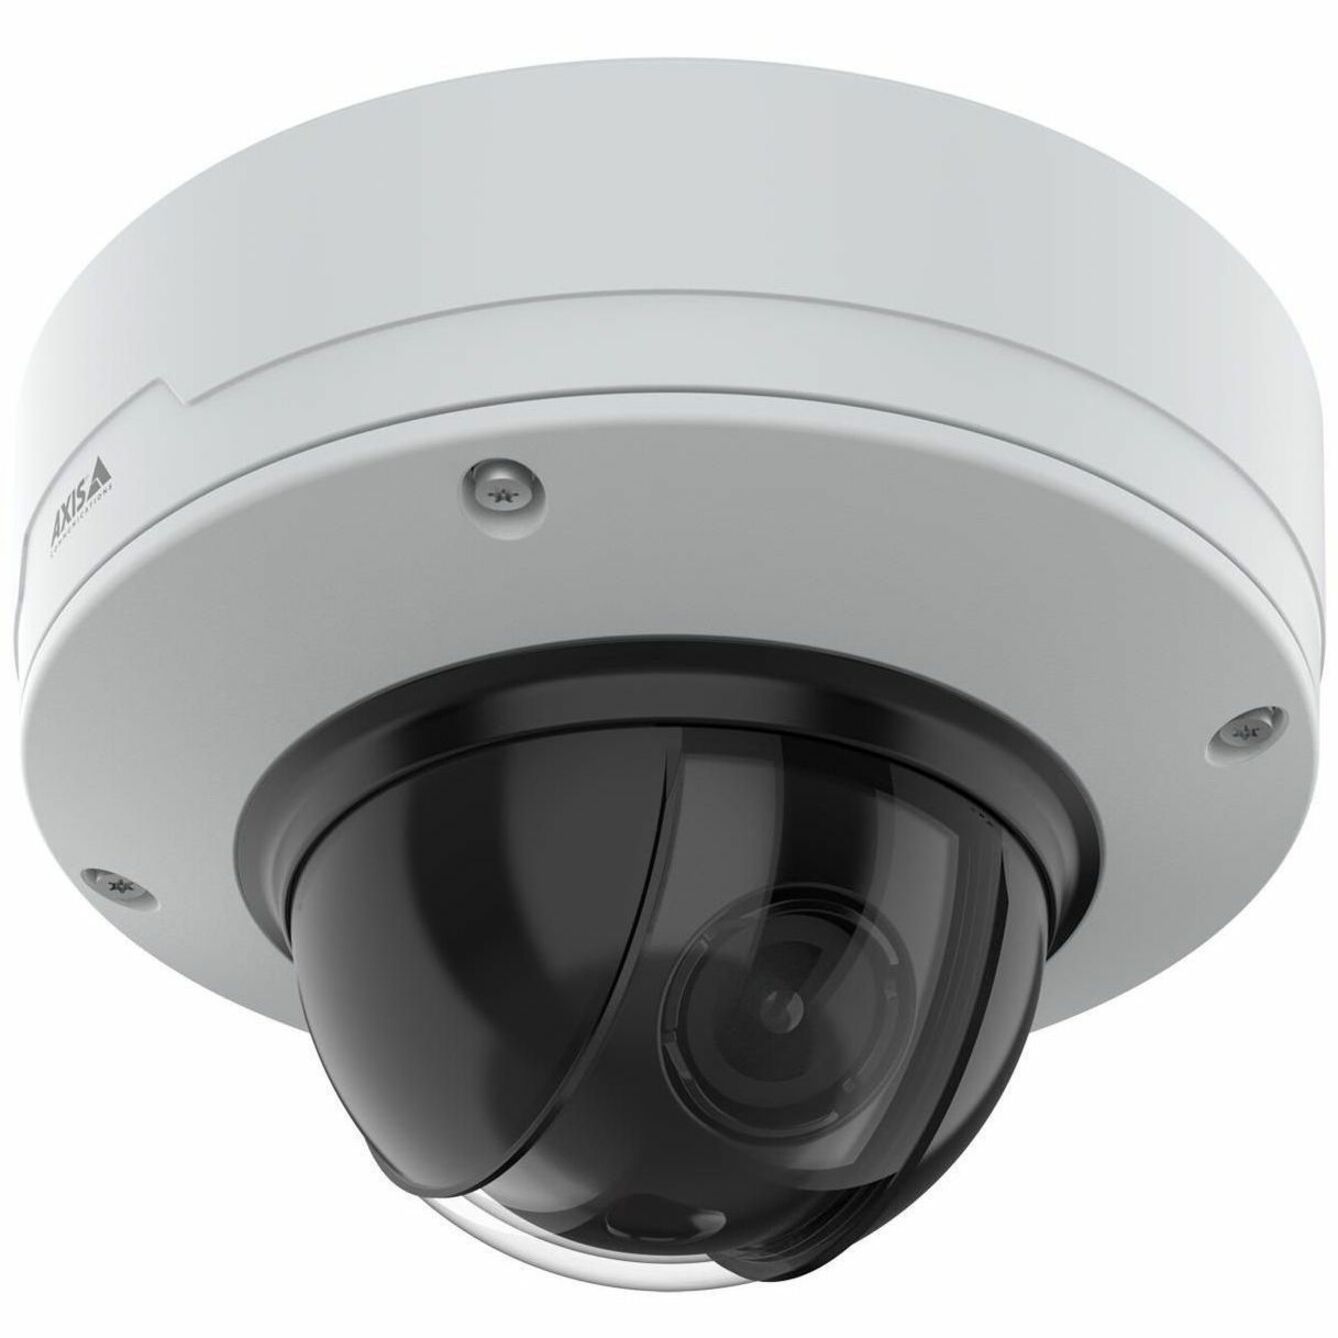 AXIS 02225-001 Q3538-LVE Network Camera, 8 Megapixel Outdoor 4K Dome, Built-in Infrared Illuminator, Wide Dynamic Range, Day/Night, TAA Compliant